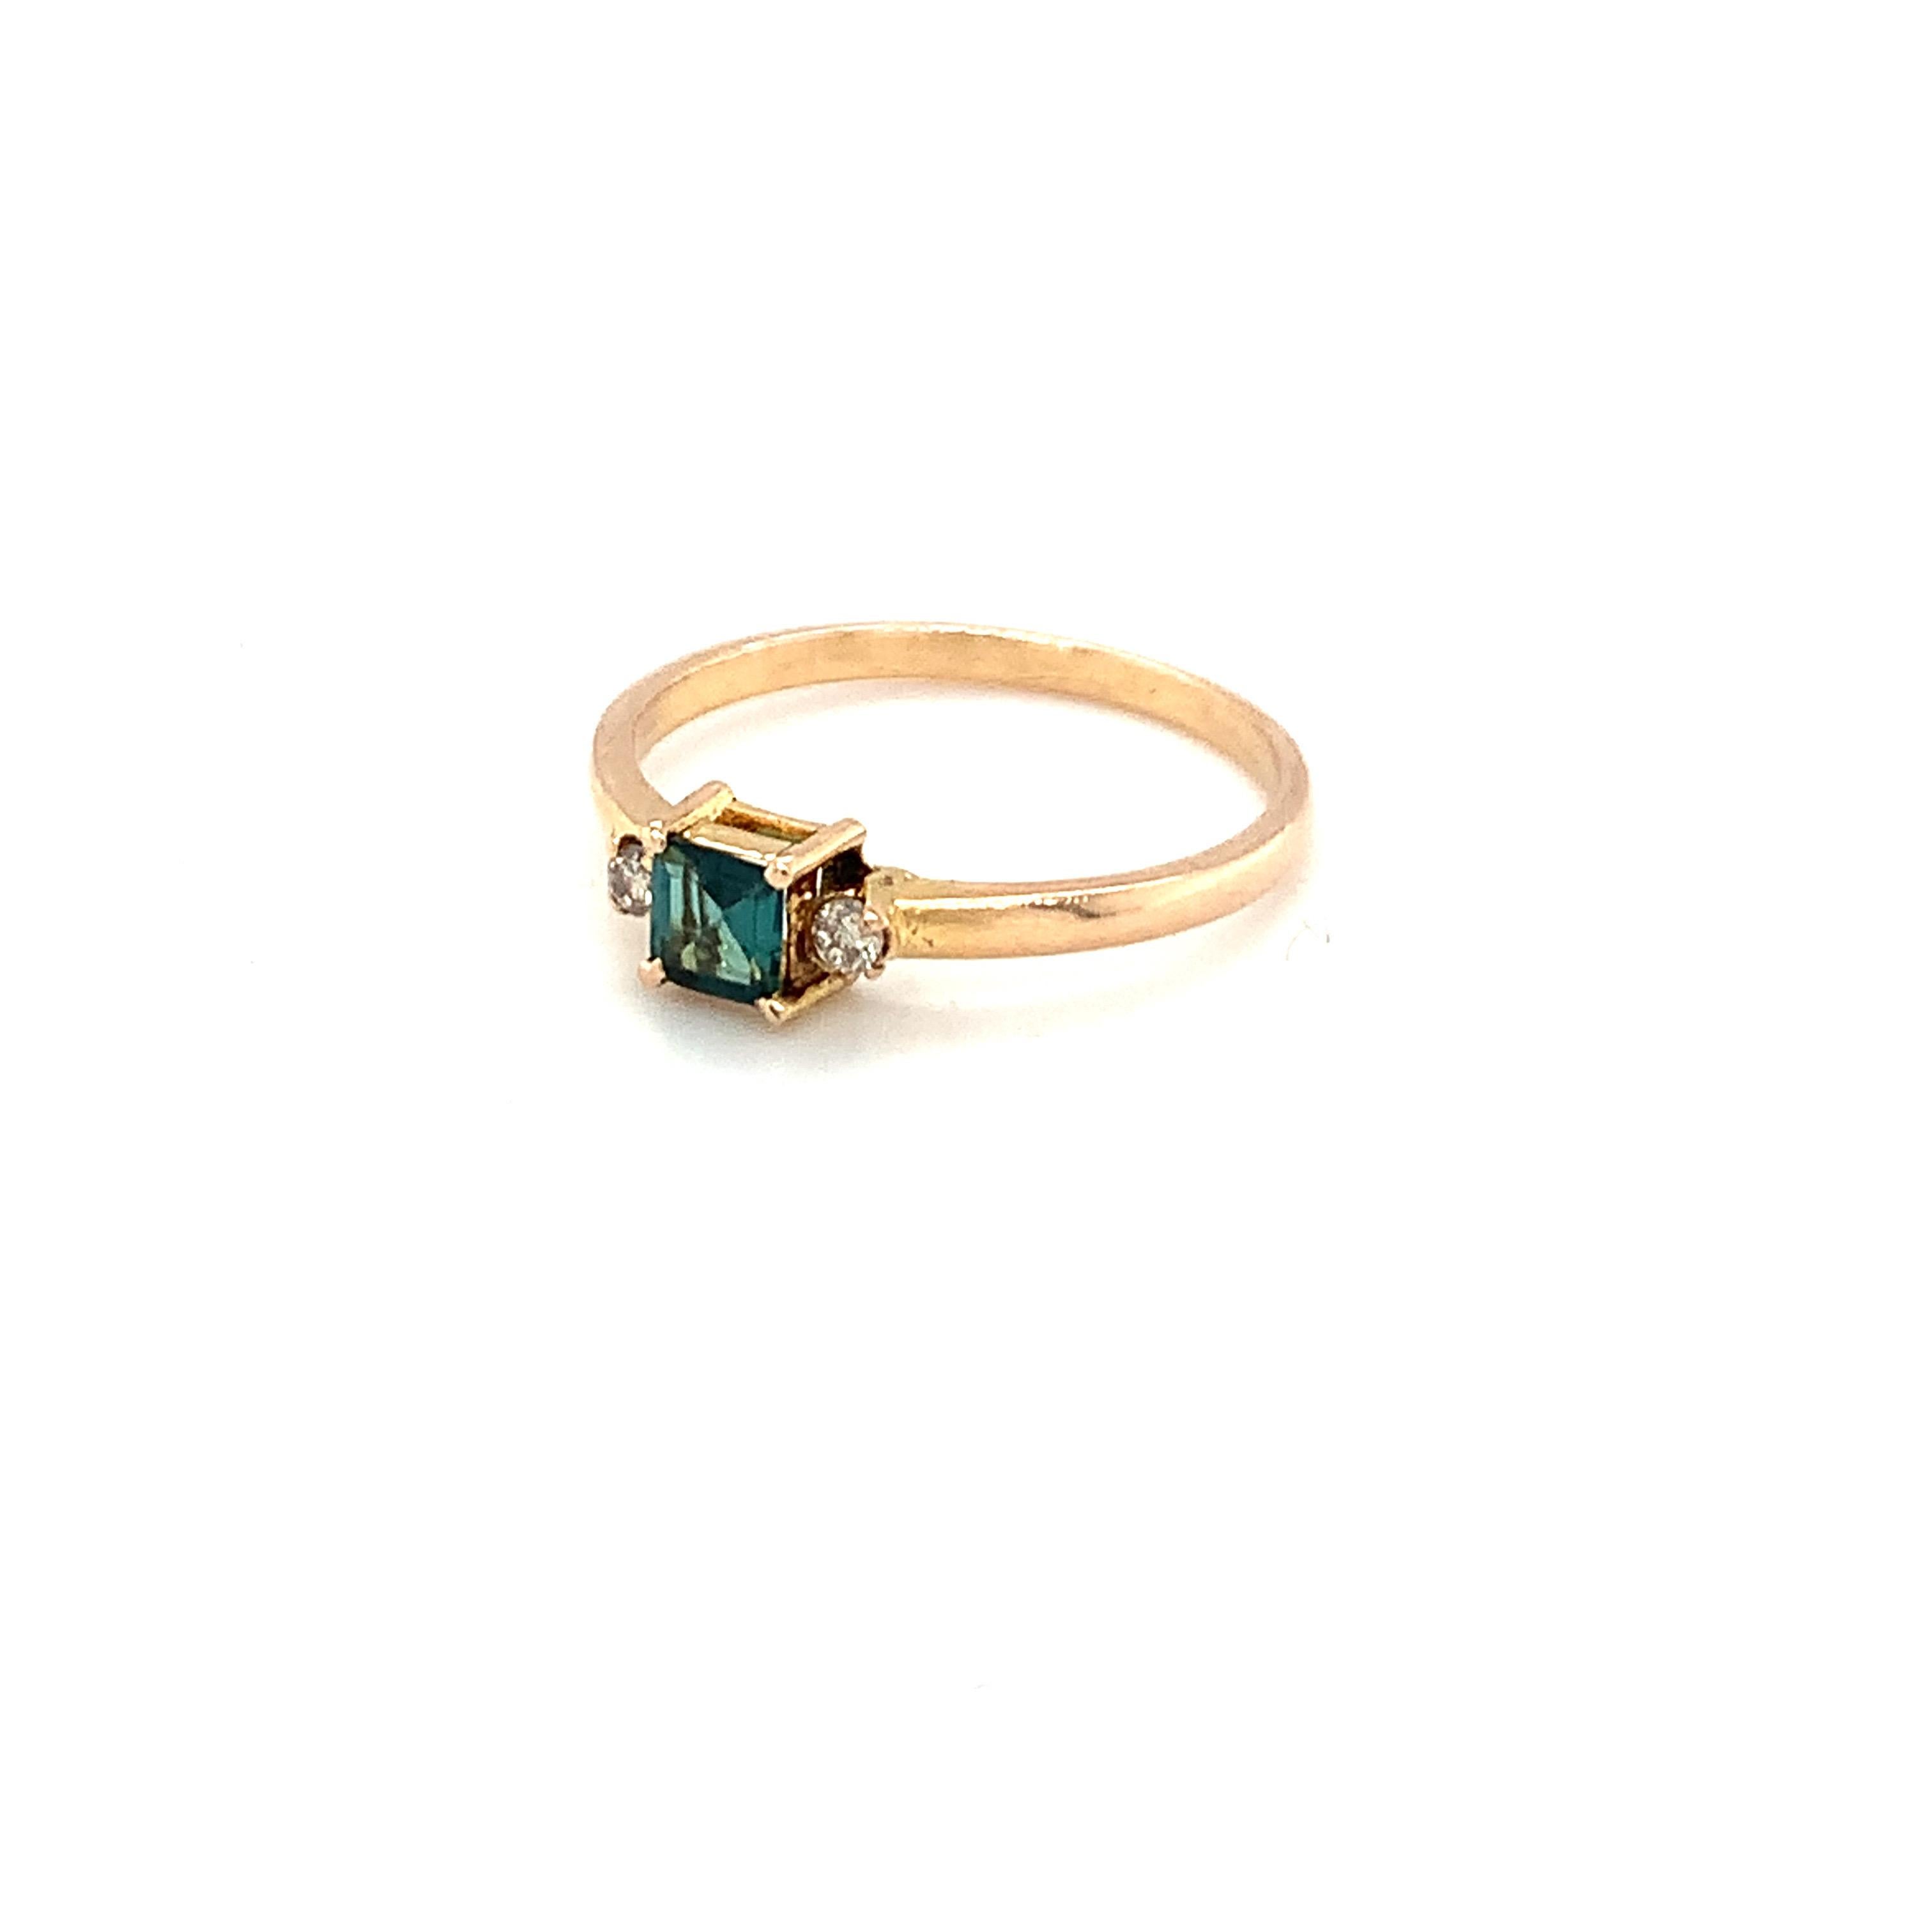 Hand cut and polished tiny natural green tourmaline ring is crafted with hand in 14K yellow gold with two accent diamonds on each side.
Ideal for casual daily wear.
Image is enlarged to get a closer view.
Ethically sourced natural gem stone.